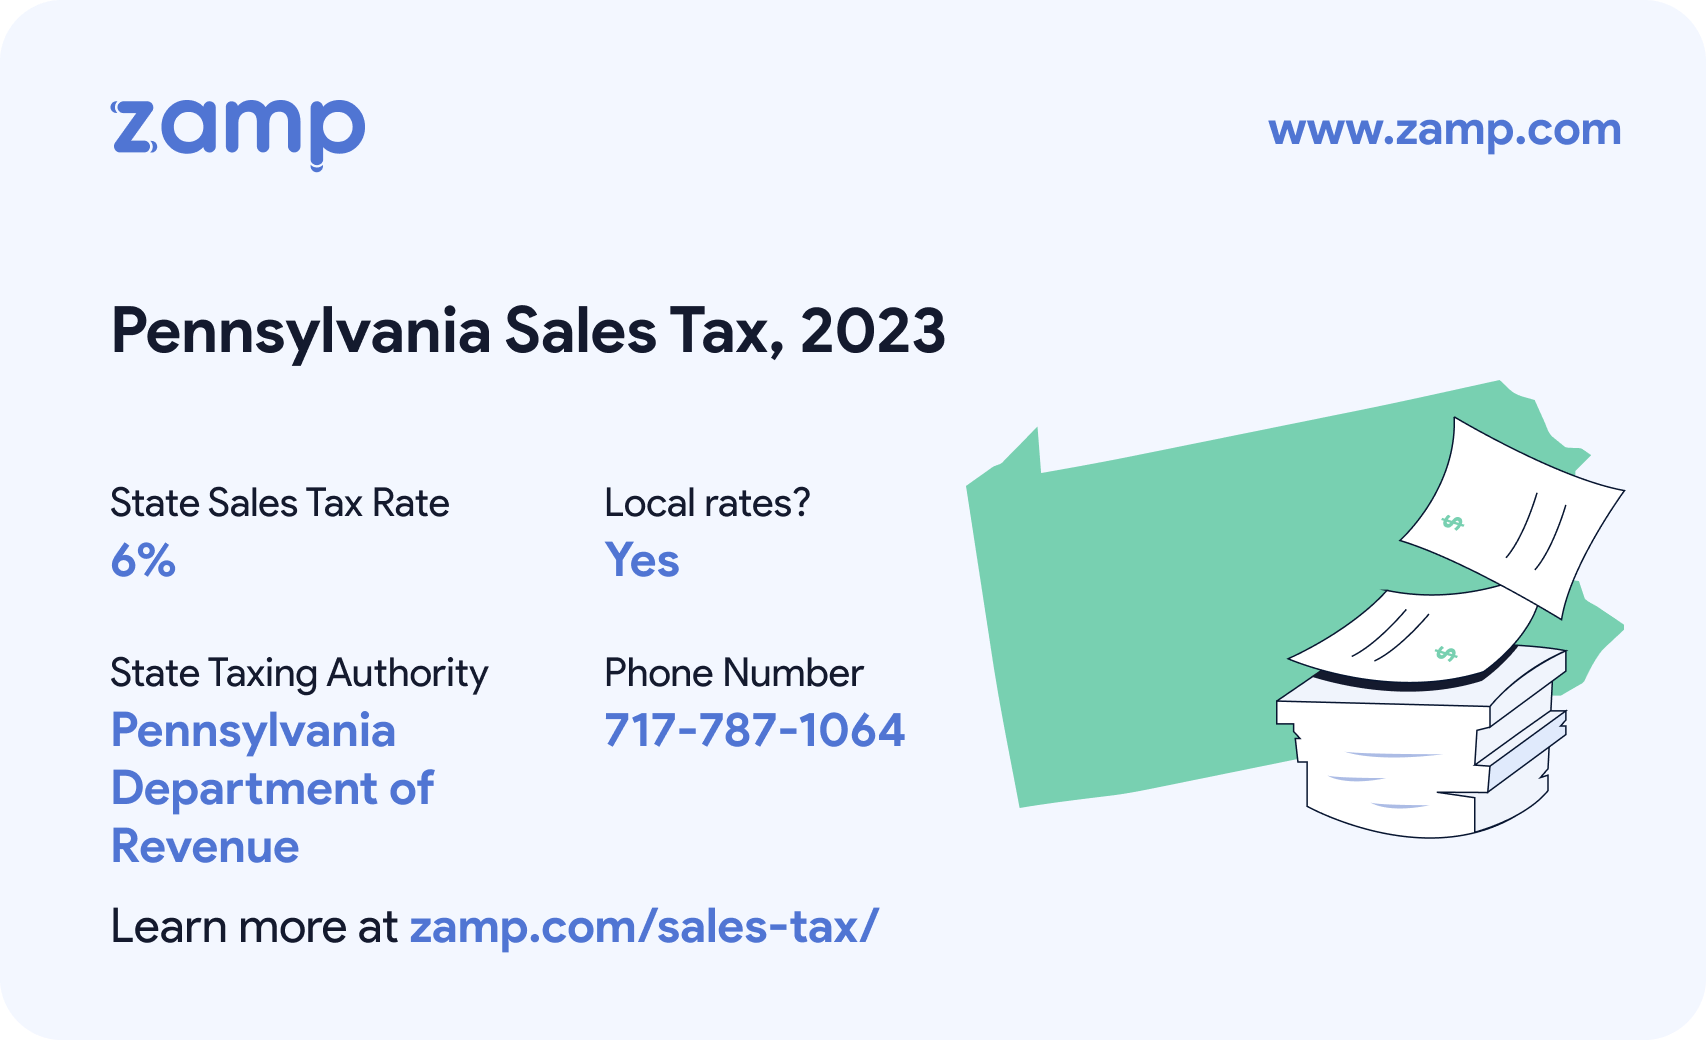 Pennsylvania basic sales tax info for 2023 - State sales tax rate: 6%, Local rates? Yes; State Taxing Authority: Pennsylvania Department of Revenue; and phone number 717-787-1064